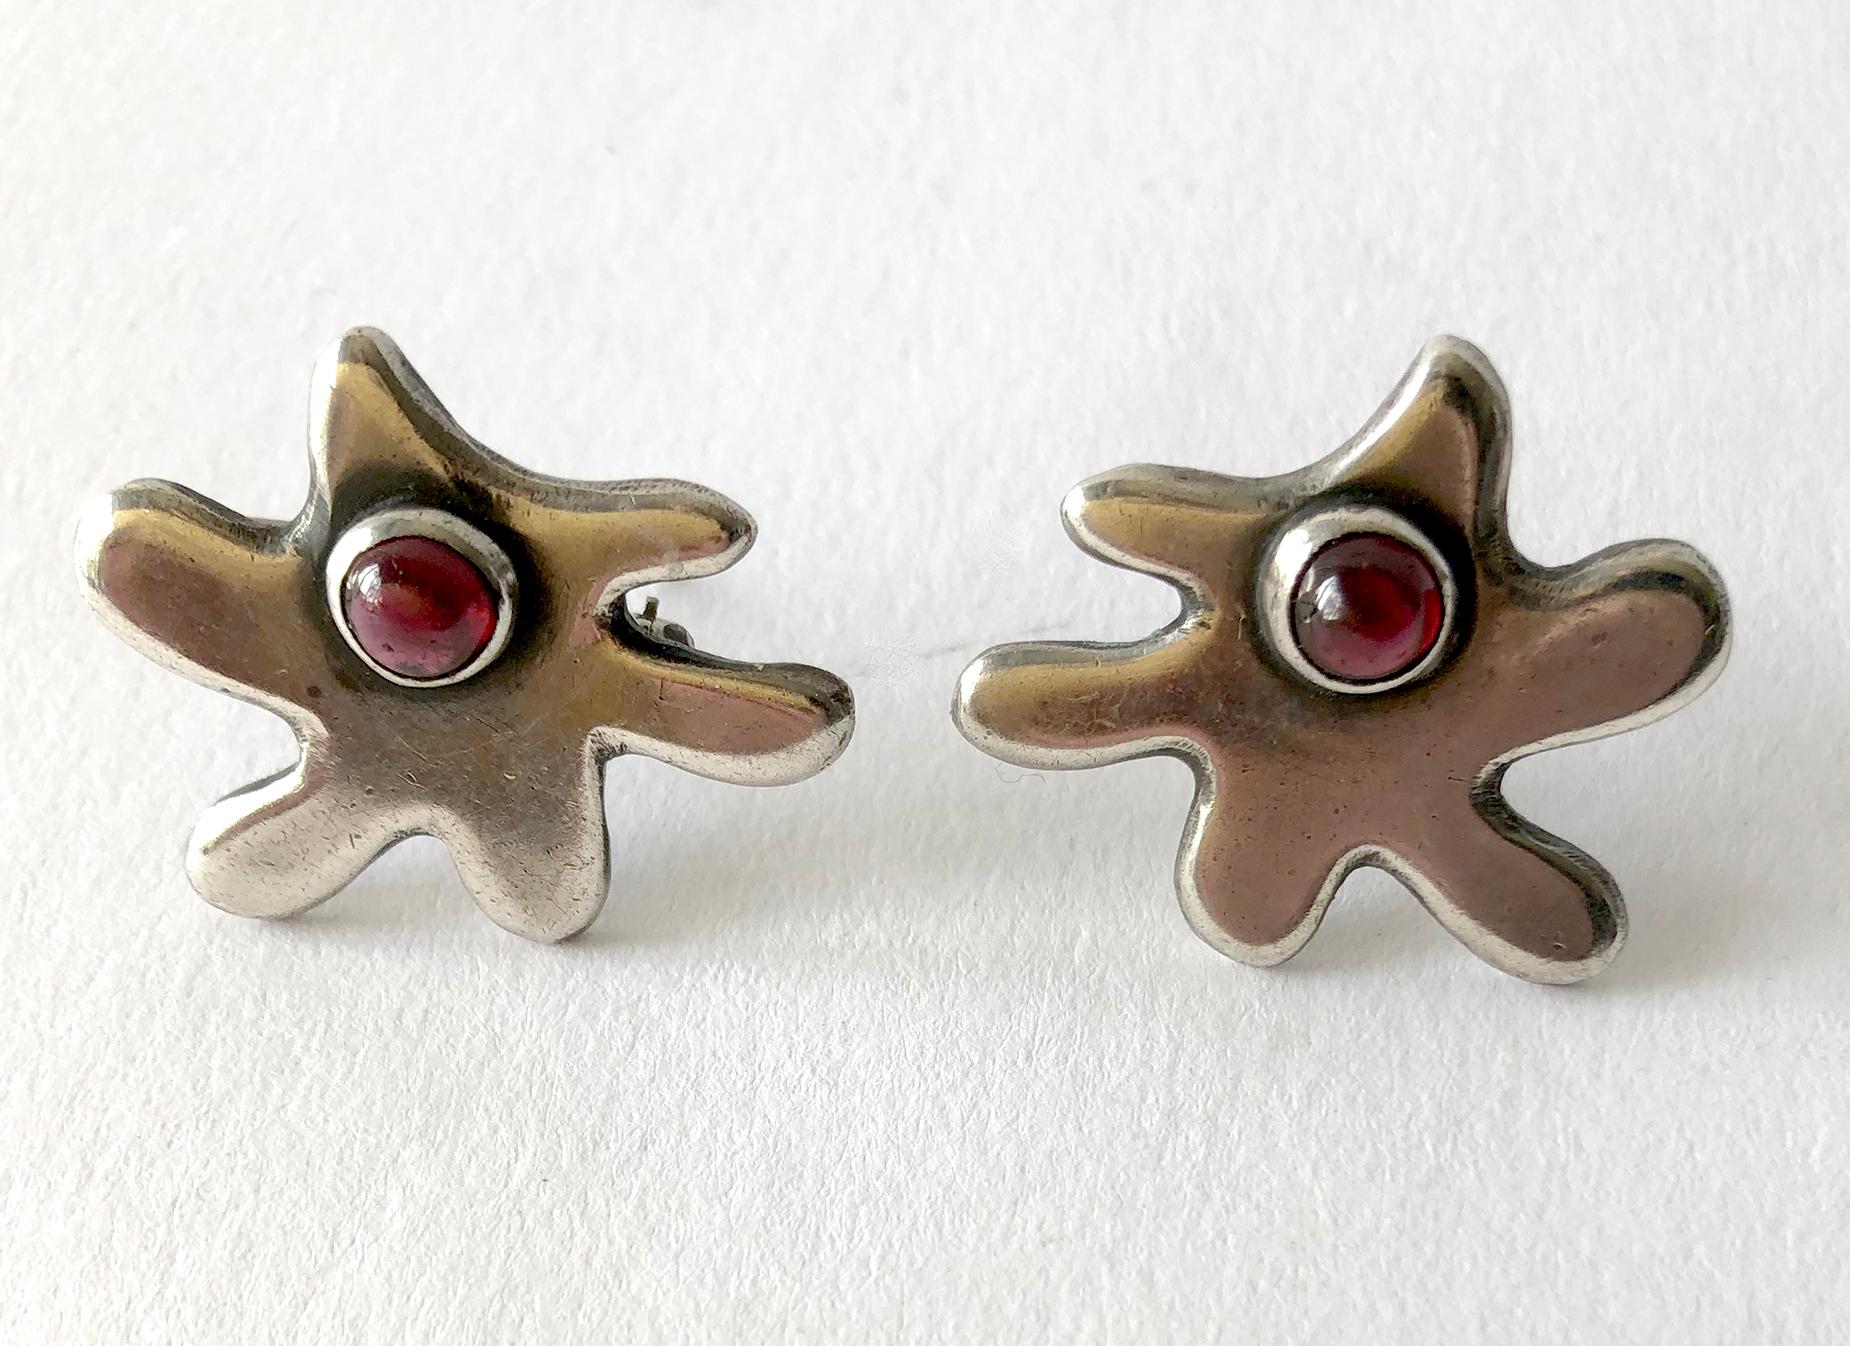 A pair of 1950's sterling silver and garnet amorphic scatter pins created by Byron. Pins measure 1 1/8